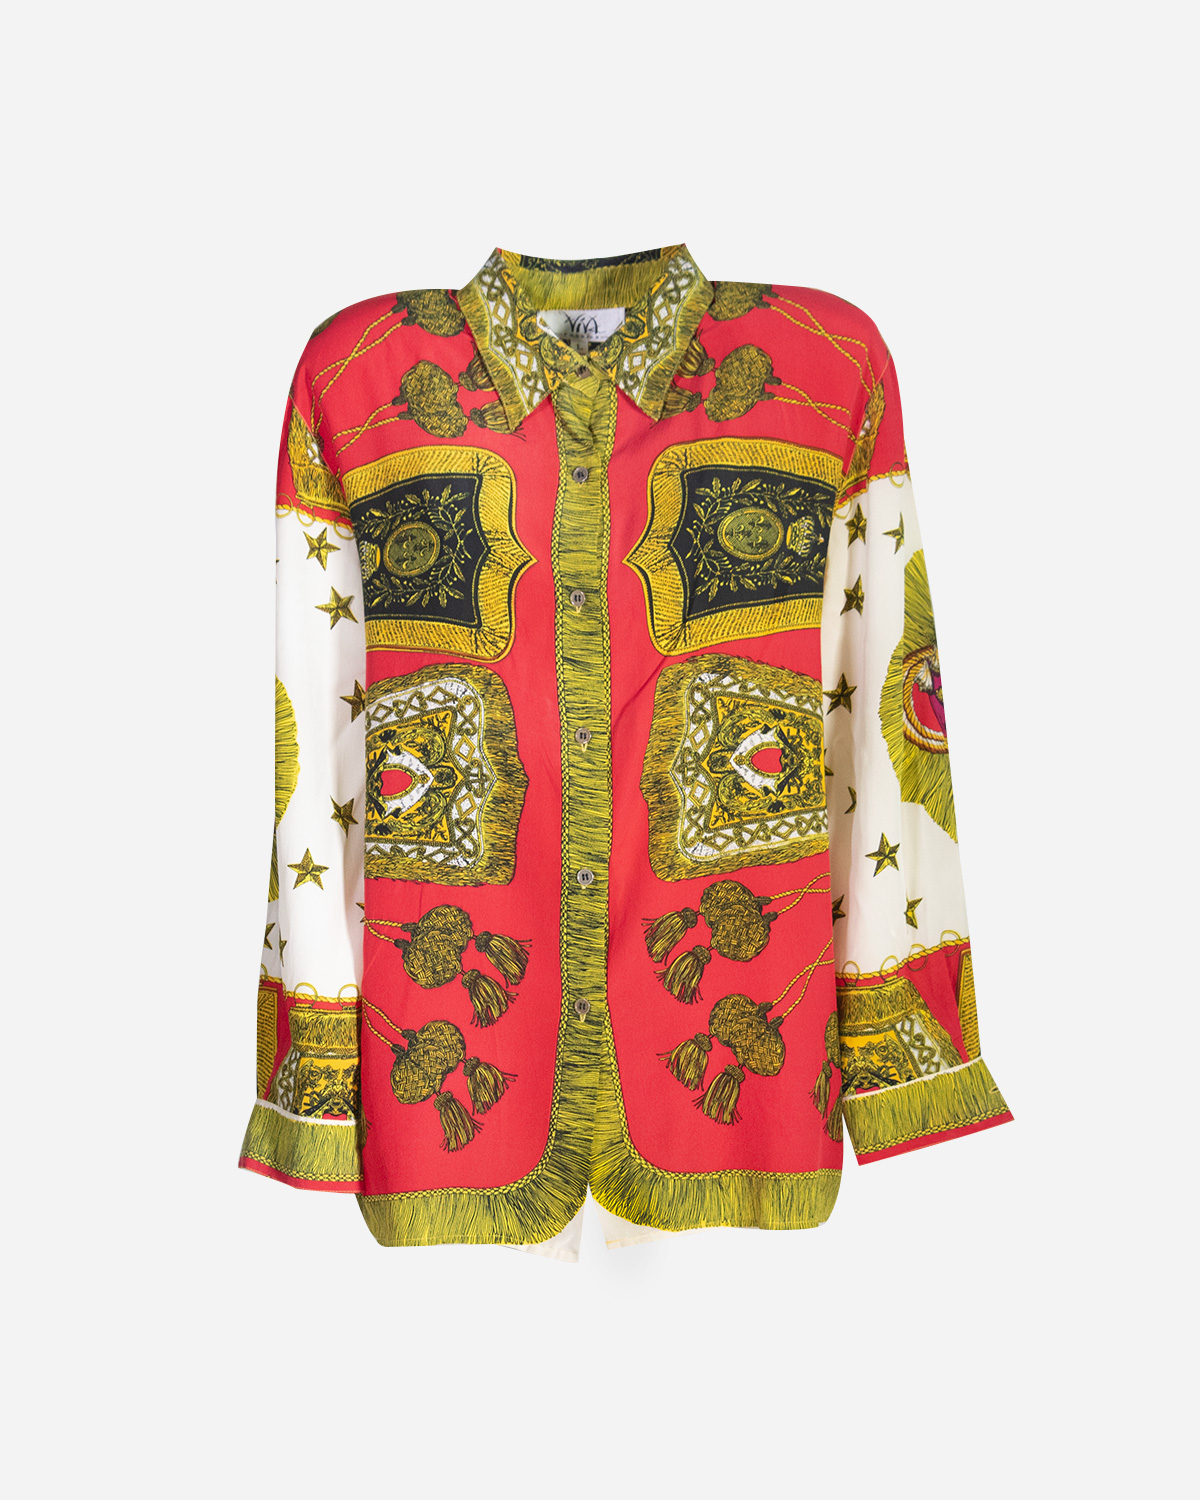 Vintage Baroque-style women’s shirts: 4 pieces